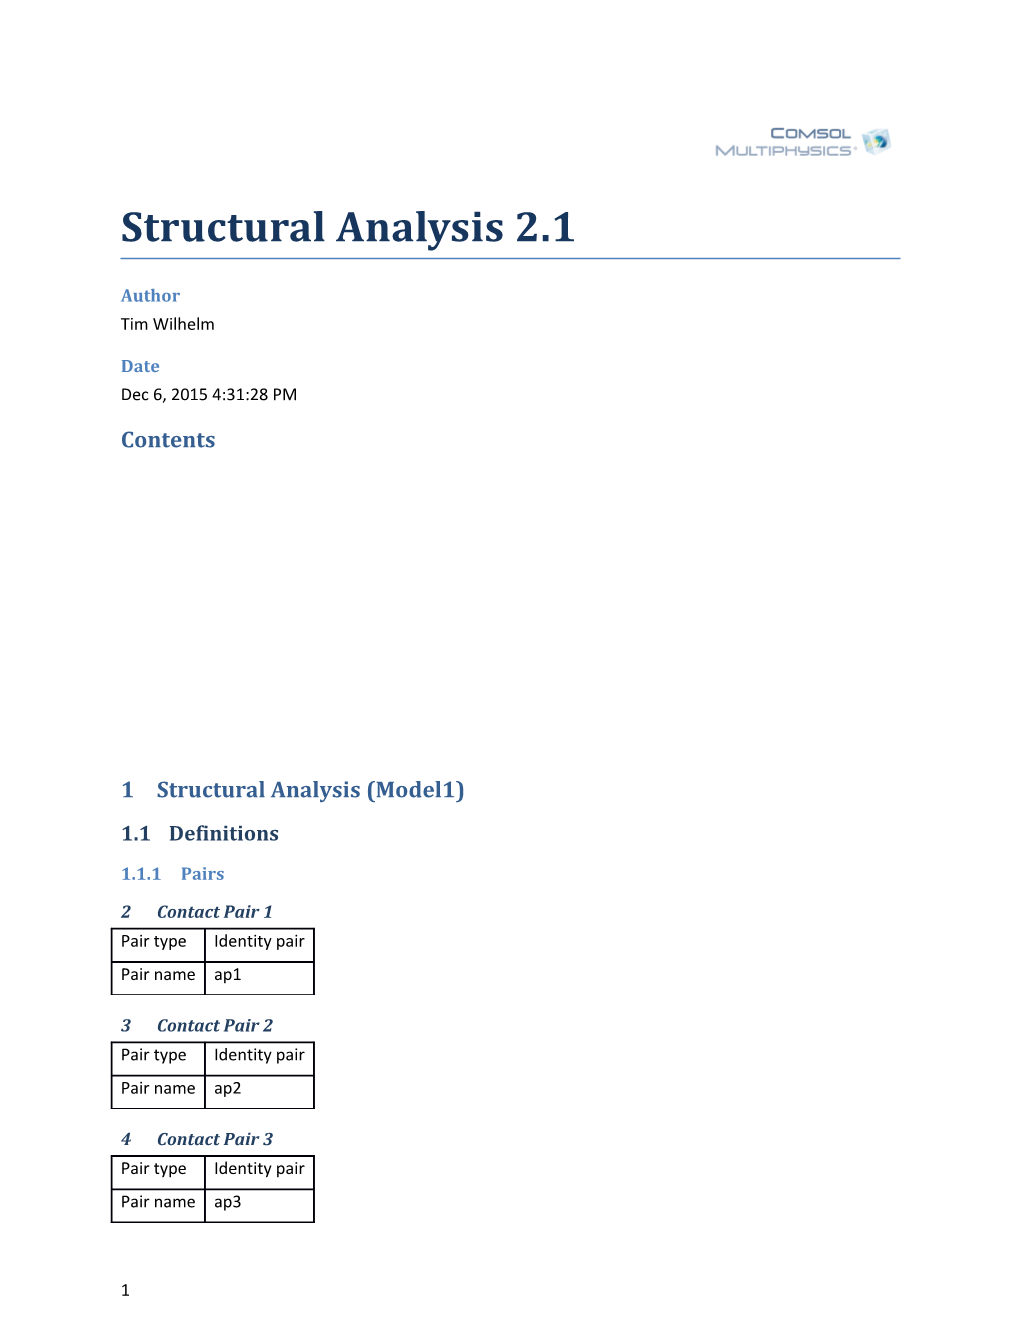 Structural Analysis 2.1